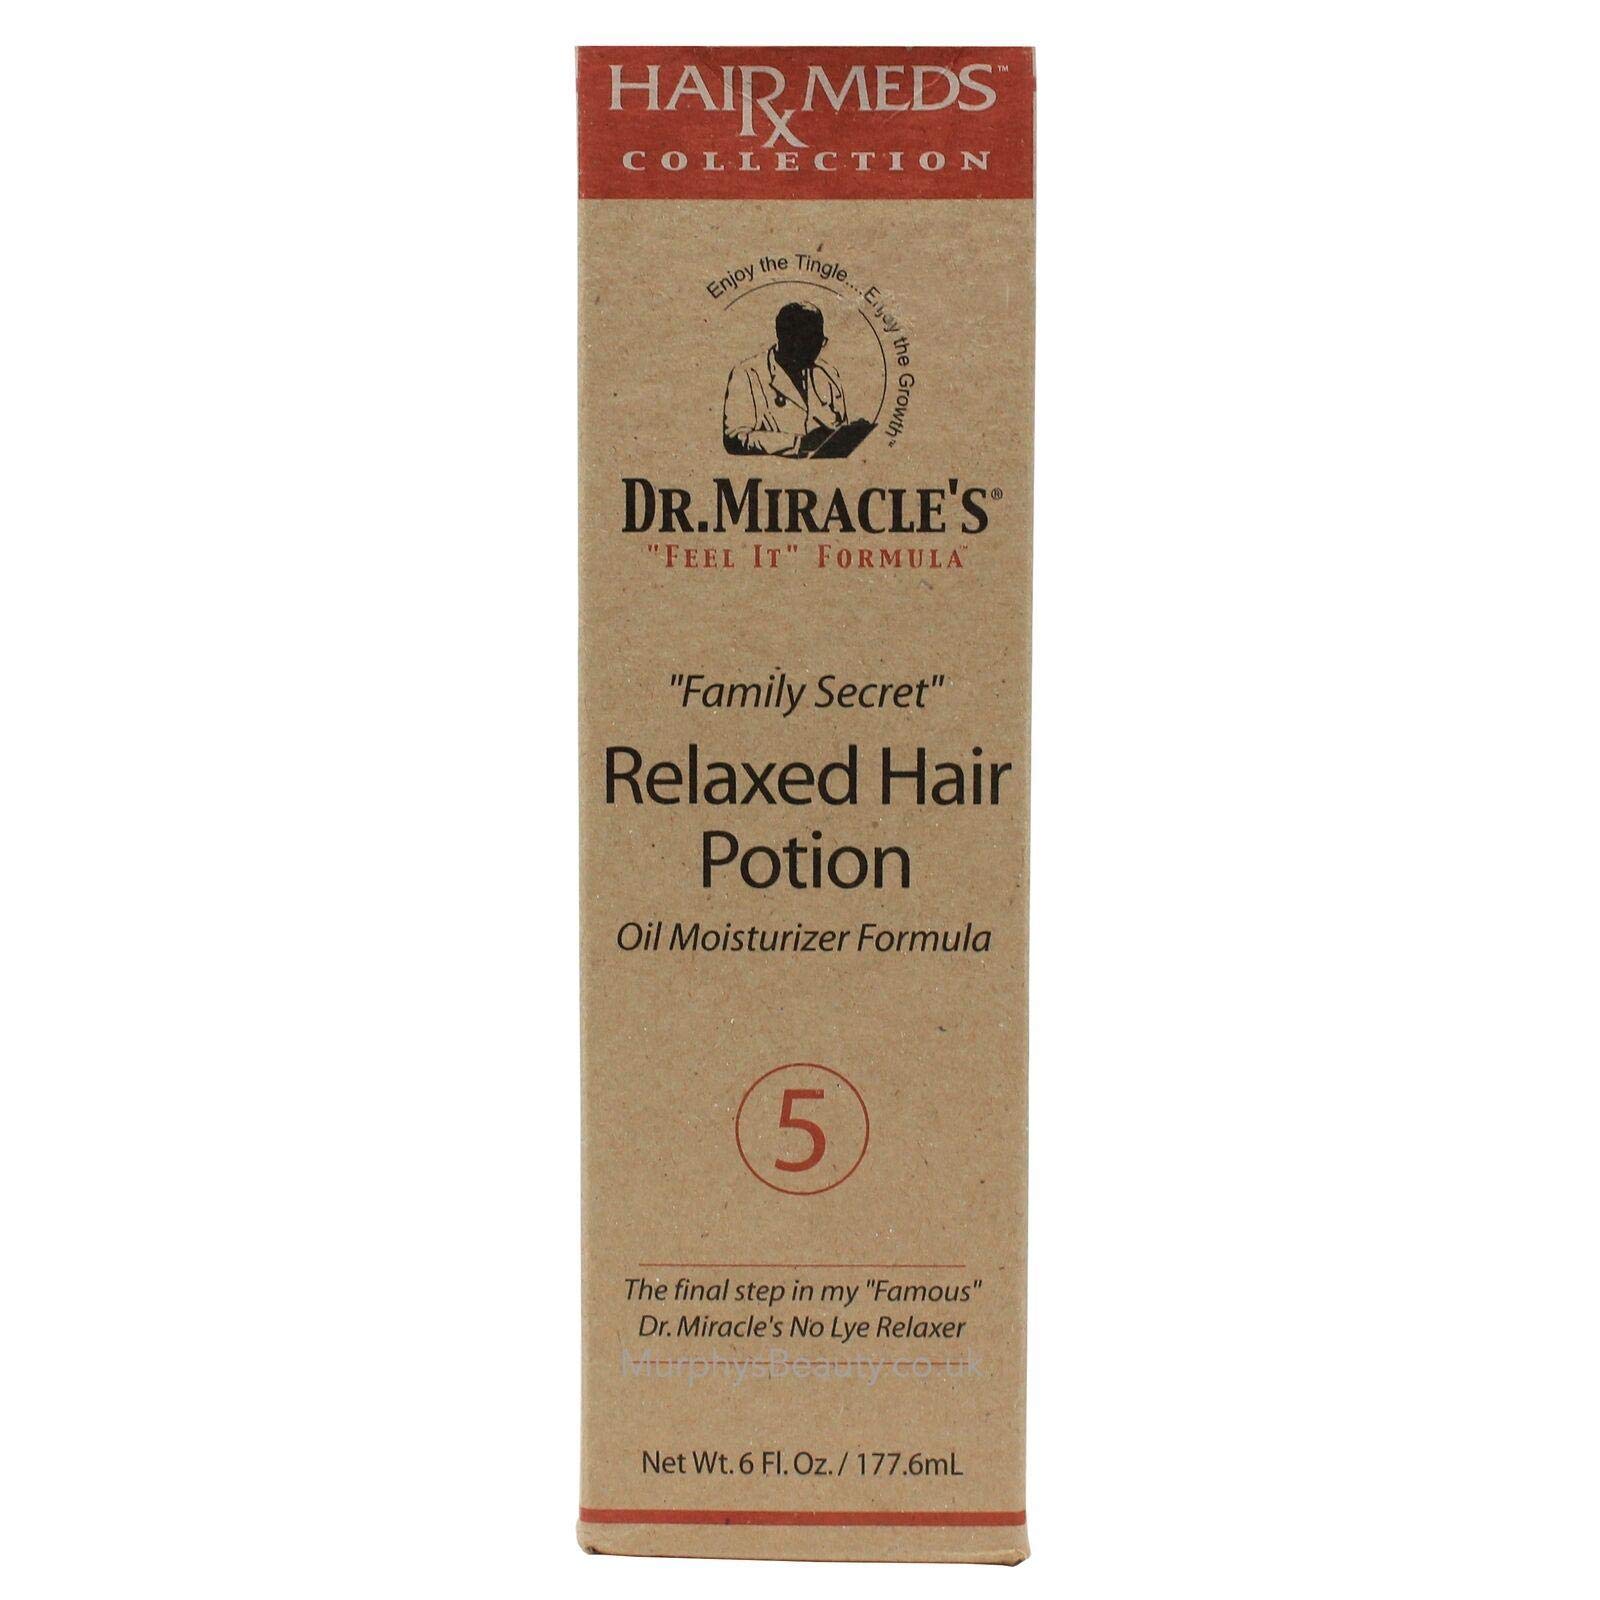 Dr. Miracle's Dr Miracles Relaxed Hair Potion Oil Moisturizer Formula